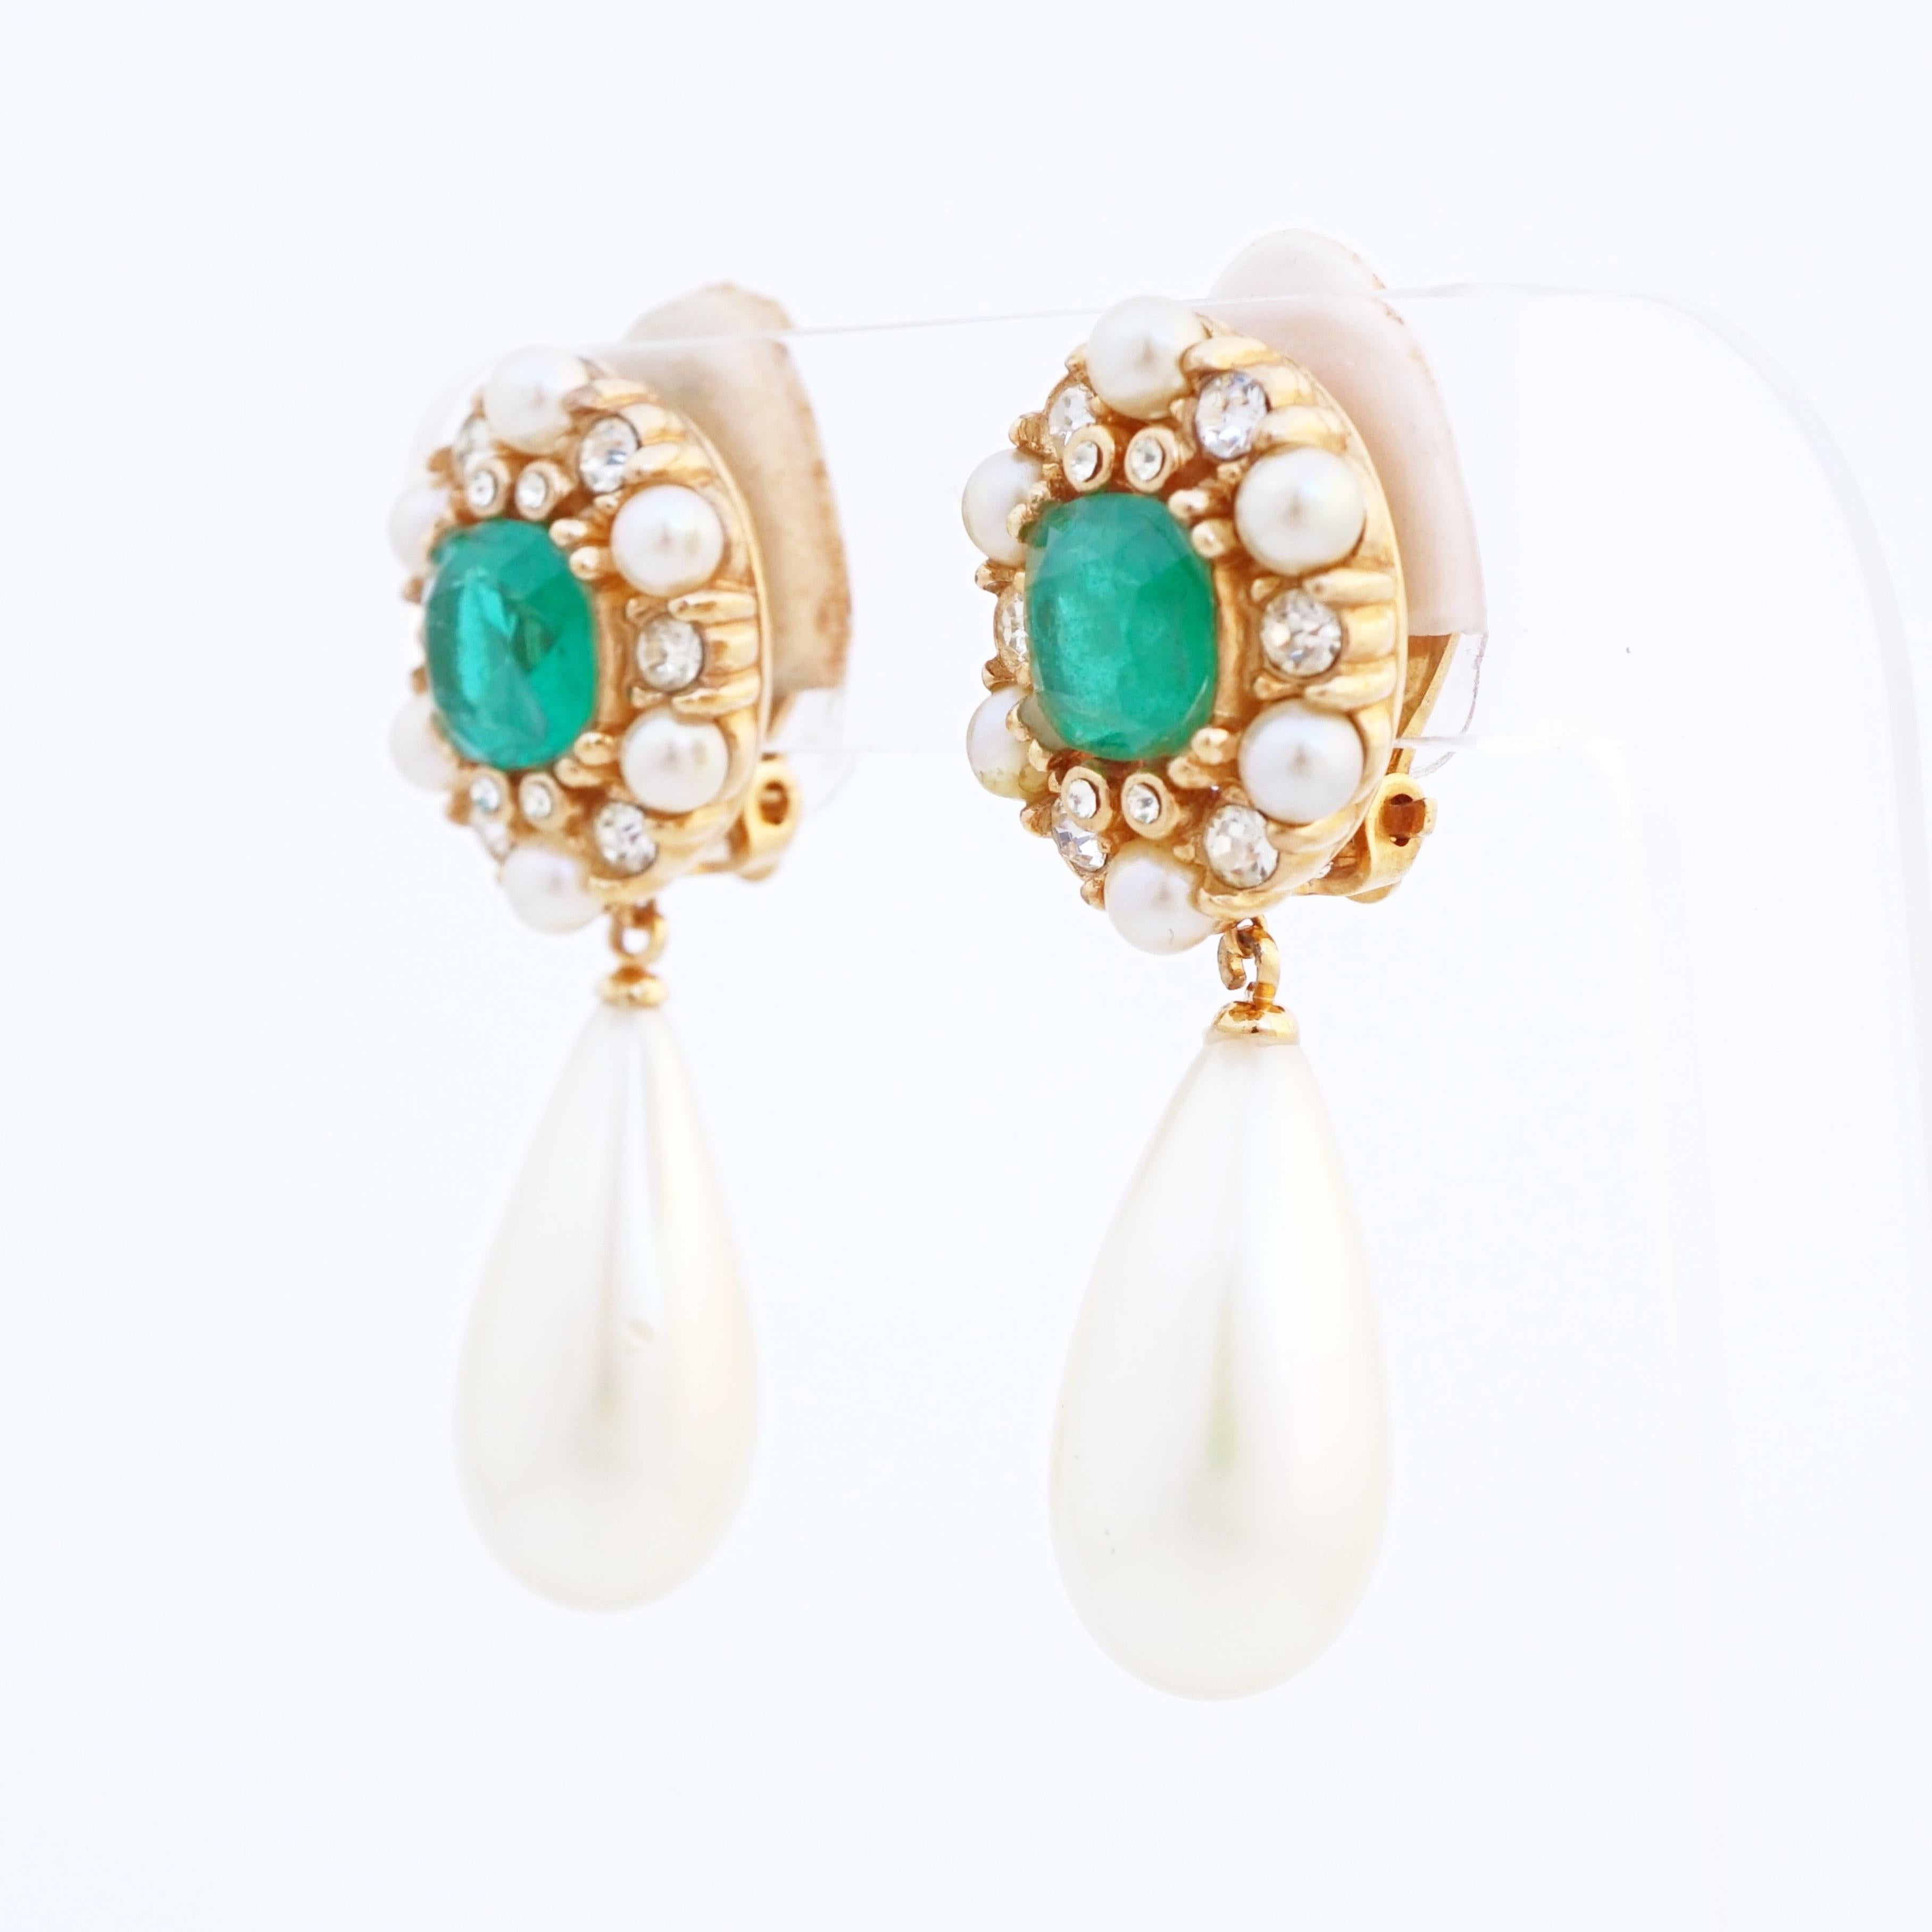 Modern Flawed Emerald Art Glass With Crystal & Pearl Halo Drop Earrings By Ciner, 1960s